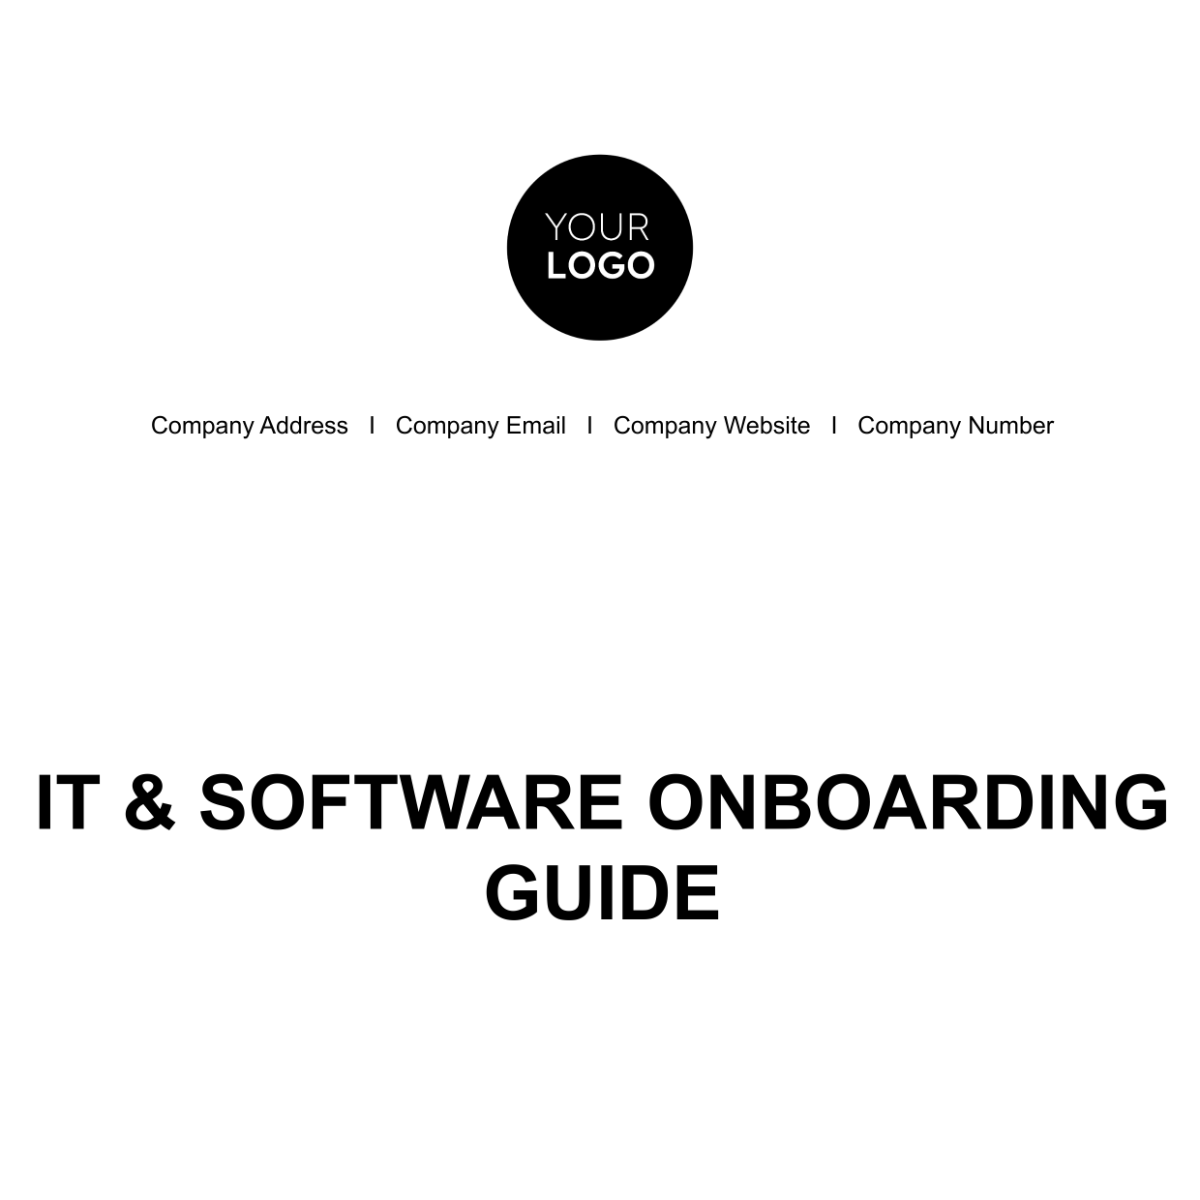 IT & Software Onboarding Guide HR Template